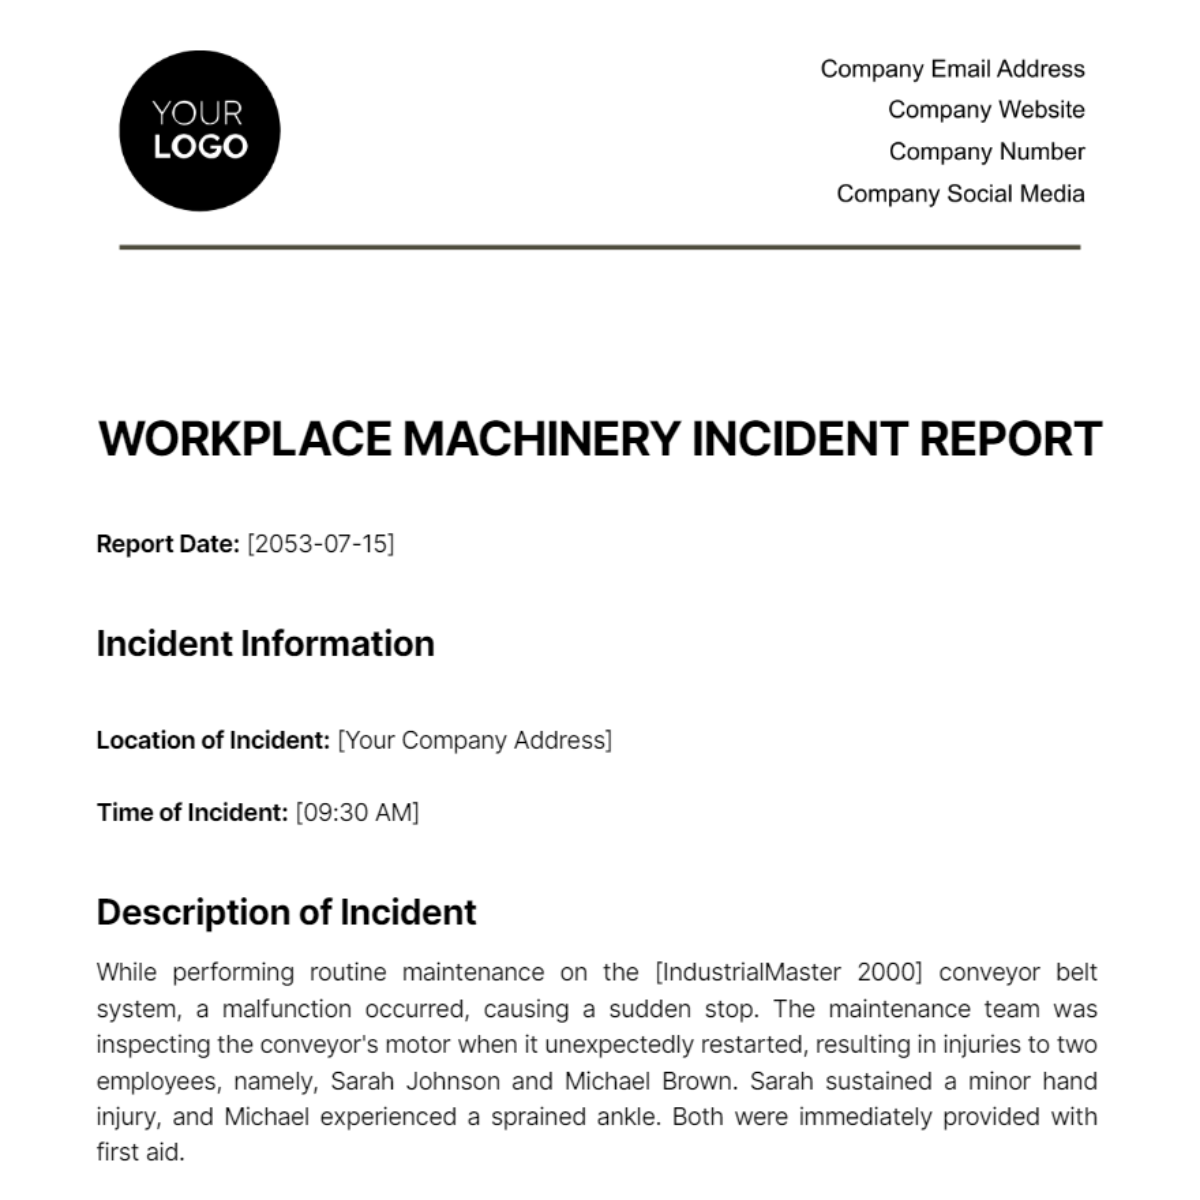 Free Workplace Machinery Incident Report Template